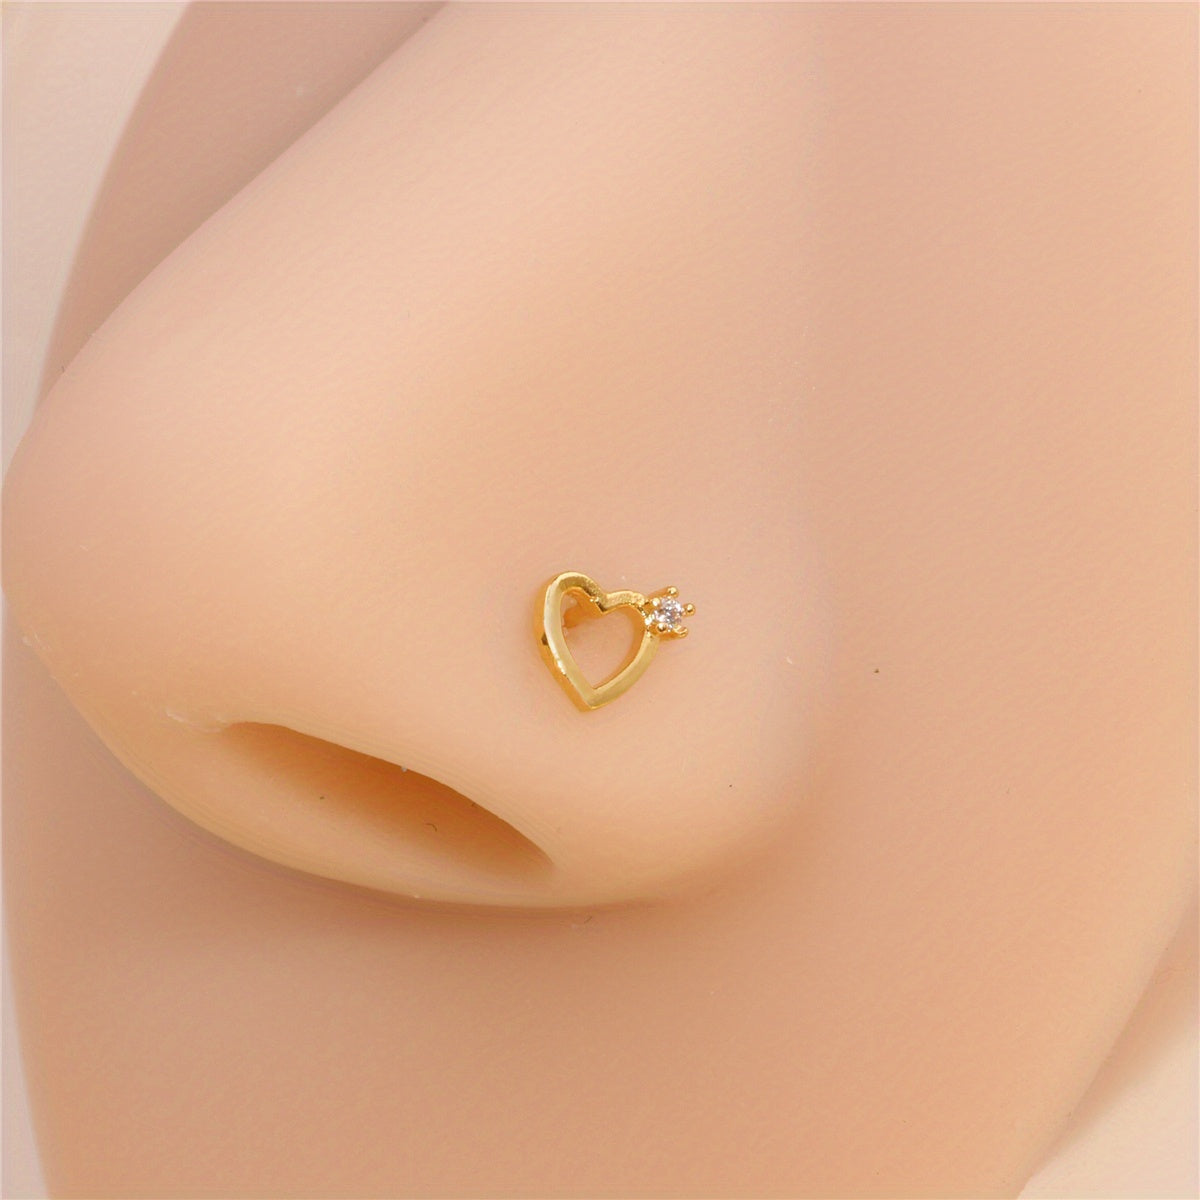 Golden Hollow Out Love Heart Shape Nose Ring Stud For Women Men L Shape Nose Screw Body Piercing Jewelry